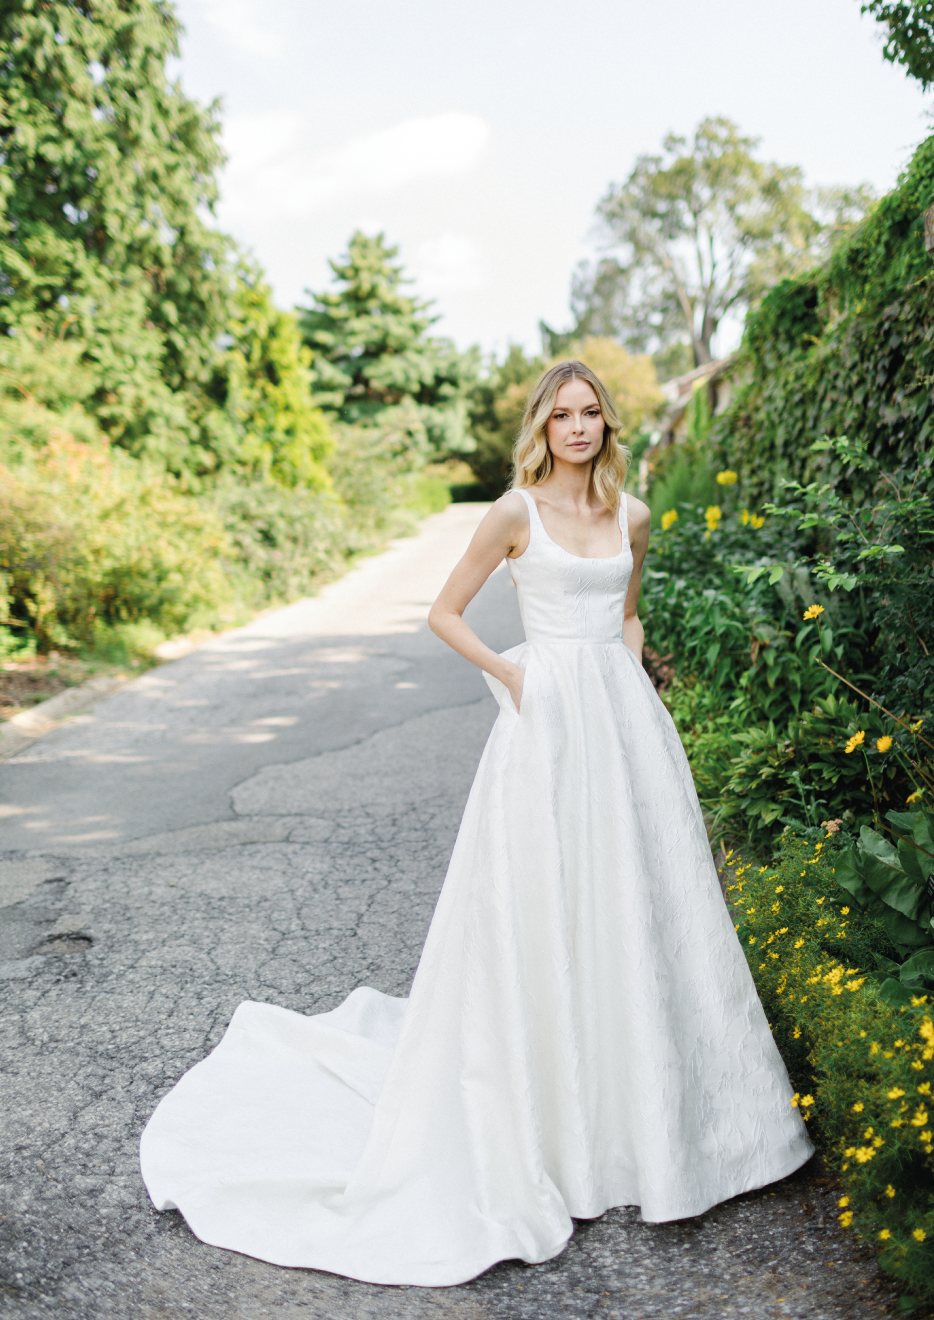 Bride Dress Model Isabella - Sleeveless scoop neck, open back gown with bow and cathedral train - Verdin New York